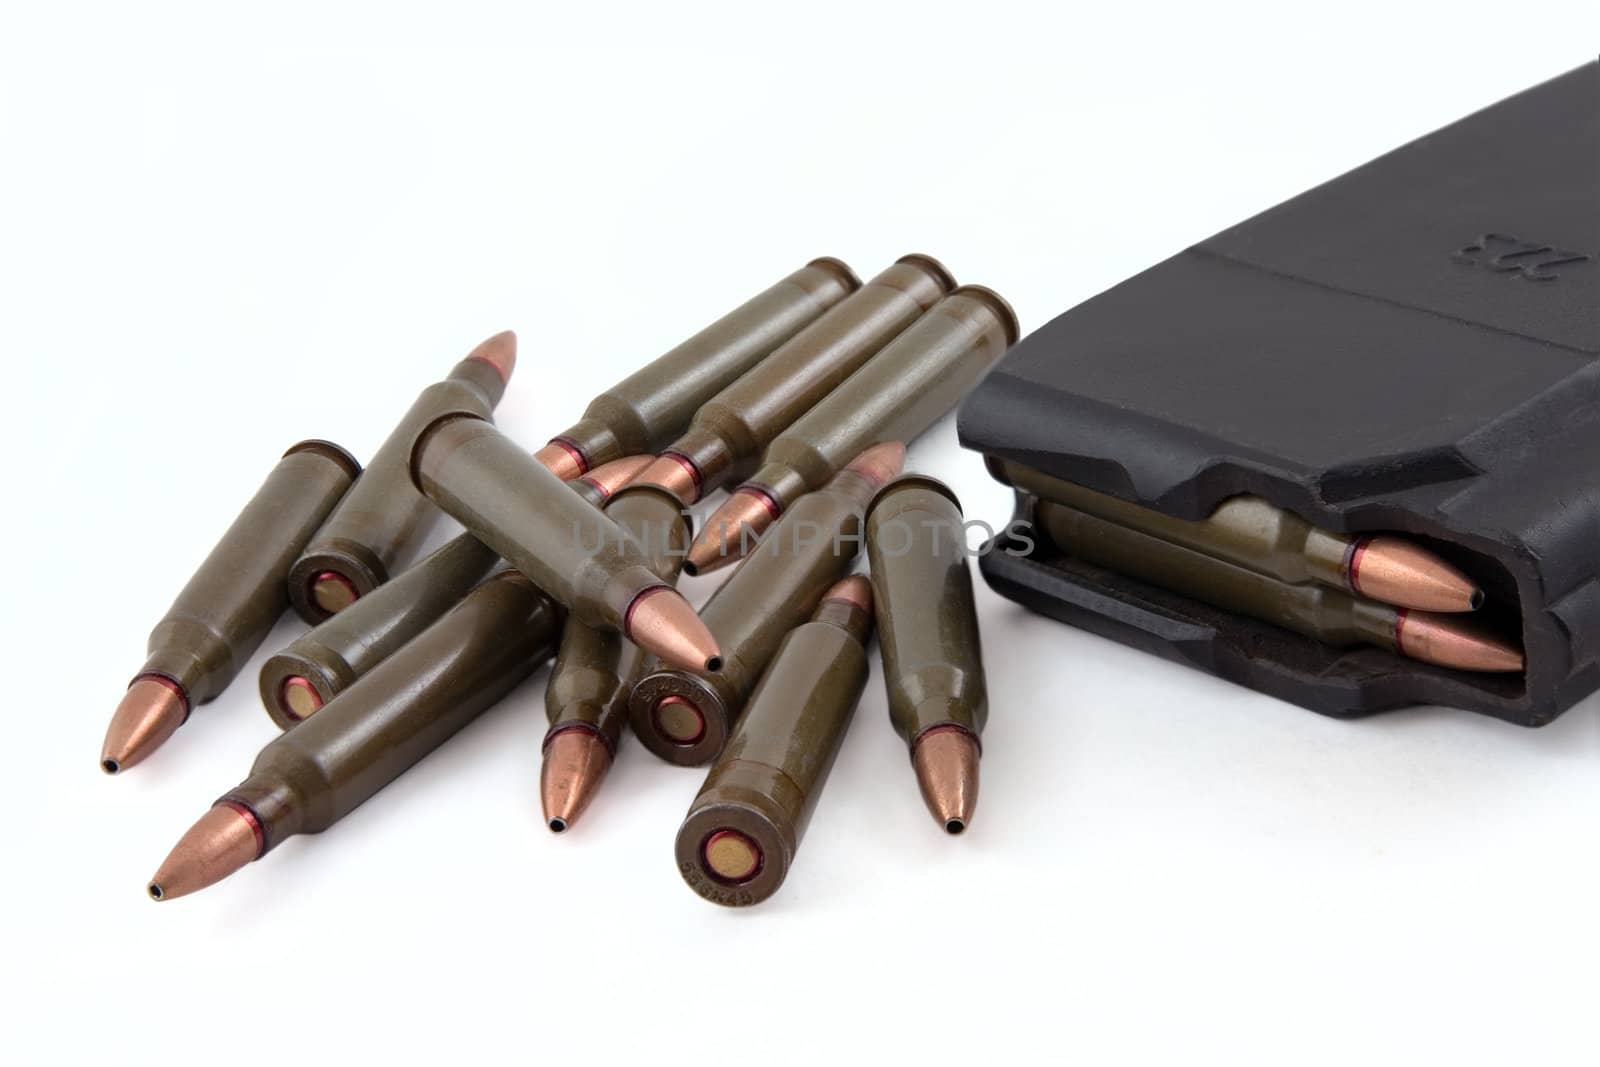 The hunting cartridges on a white background